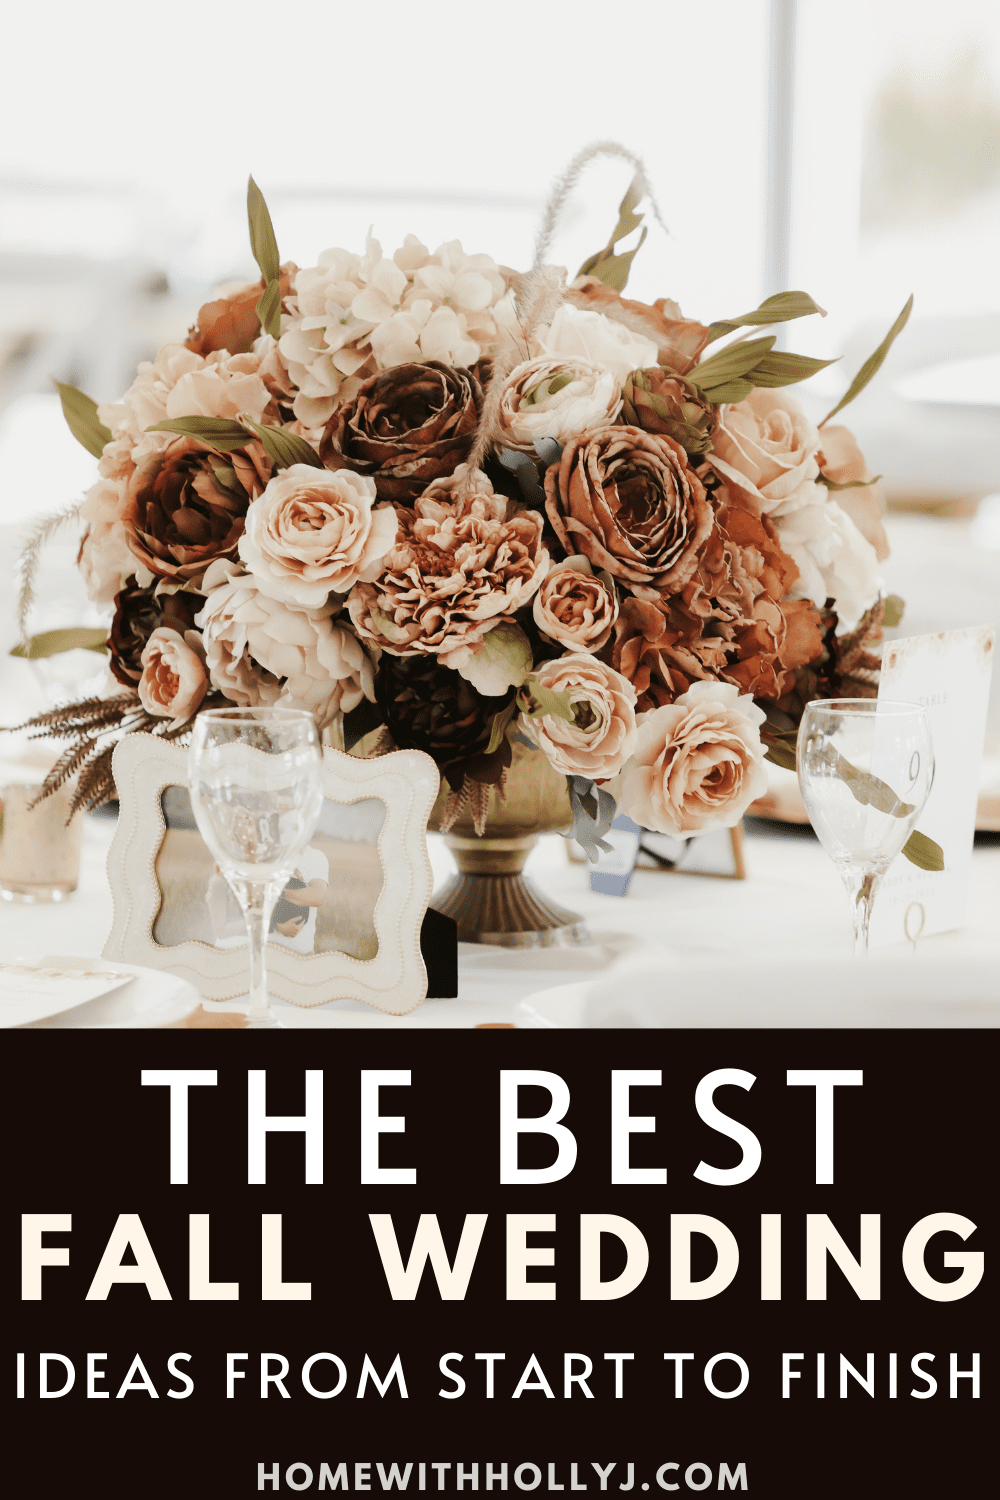 From planning to tablescapes to ideas for the ceremony, reception, and send off. This fall wedding inspiration is just what you need.